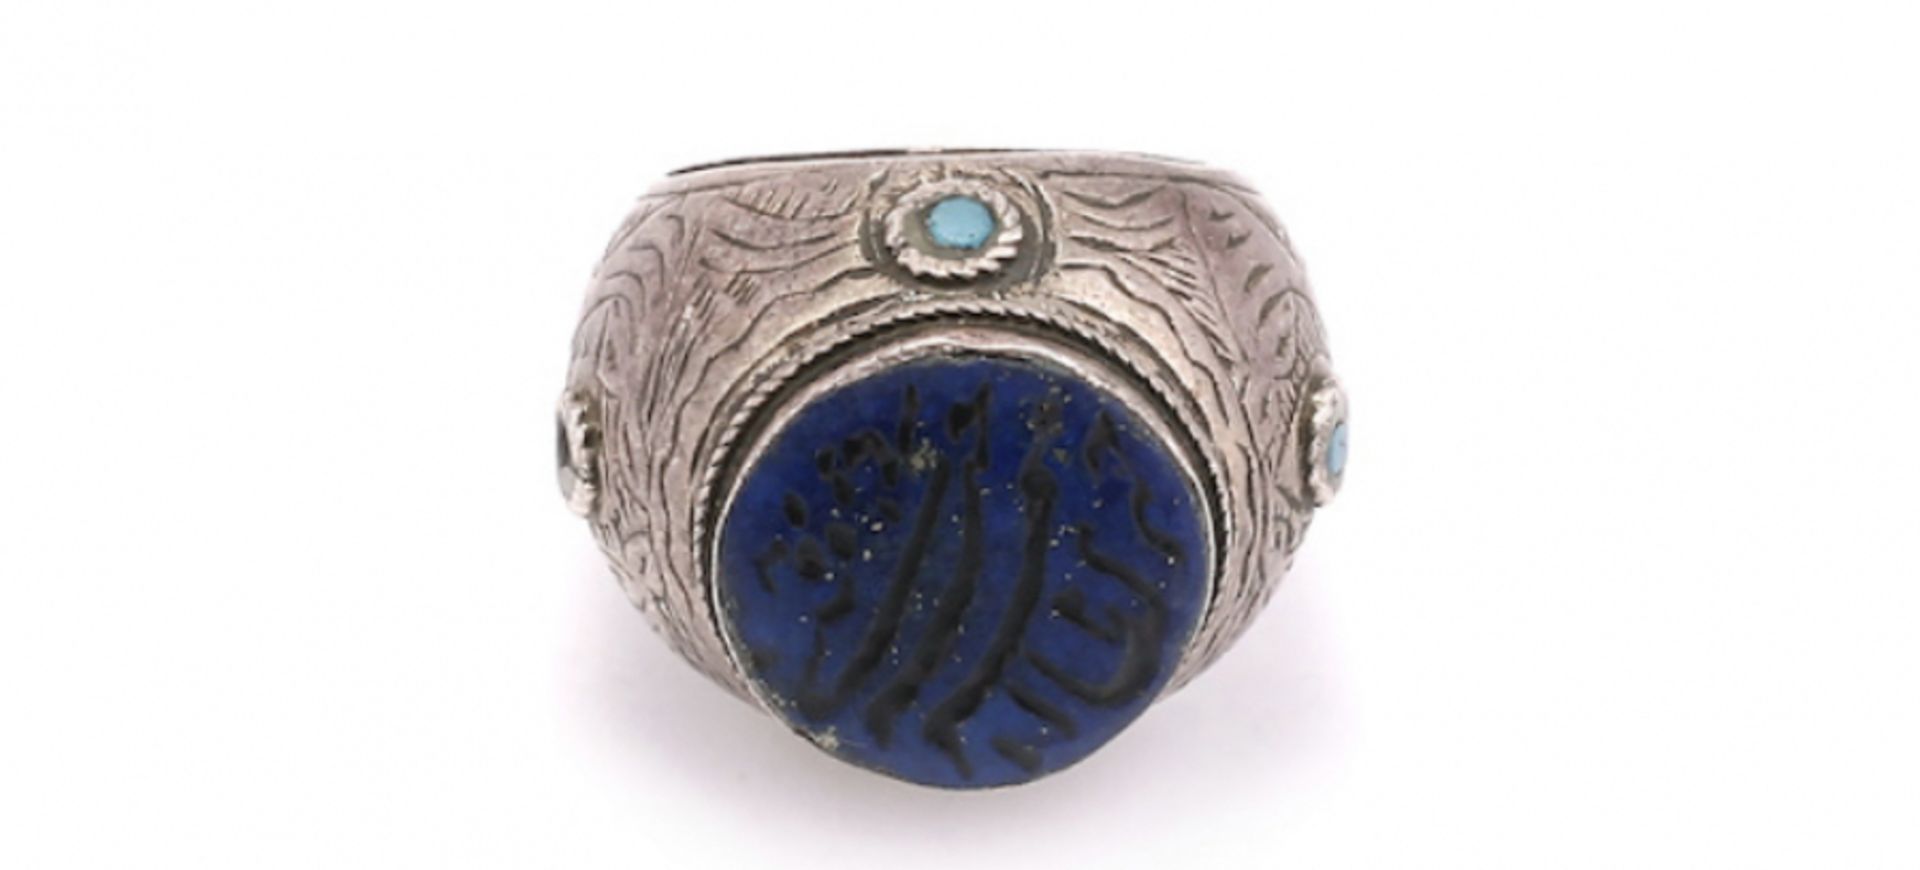 Three Ottoman silver rings - Image 6 of 11